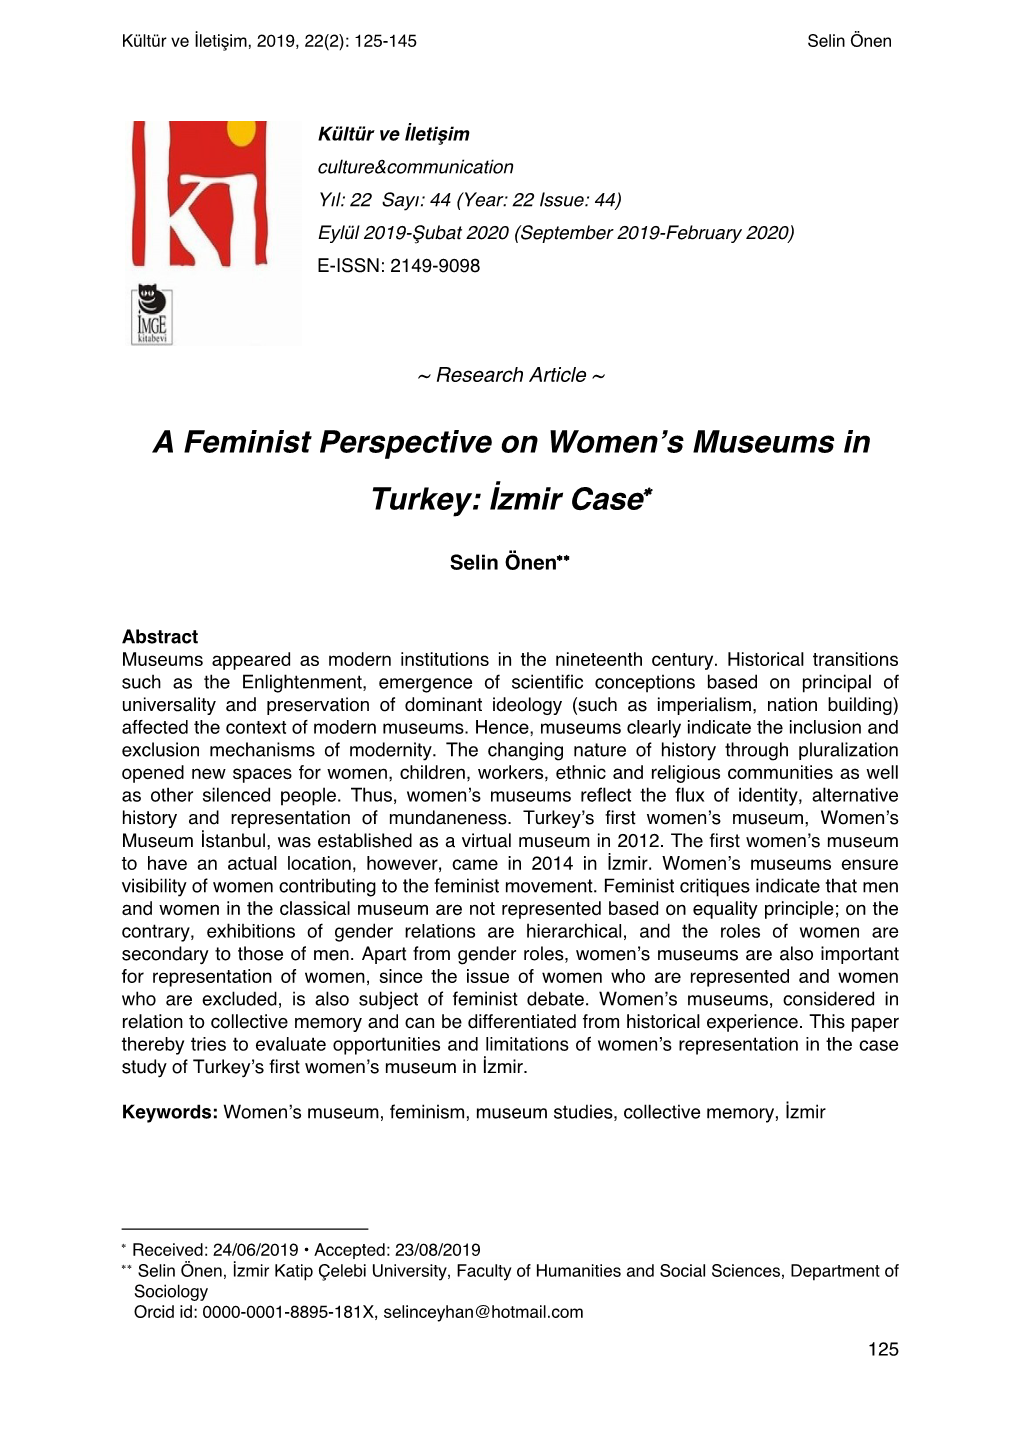 A Feminist Perspective on Women's Museums in Turkey